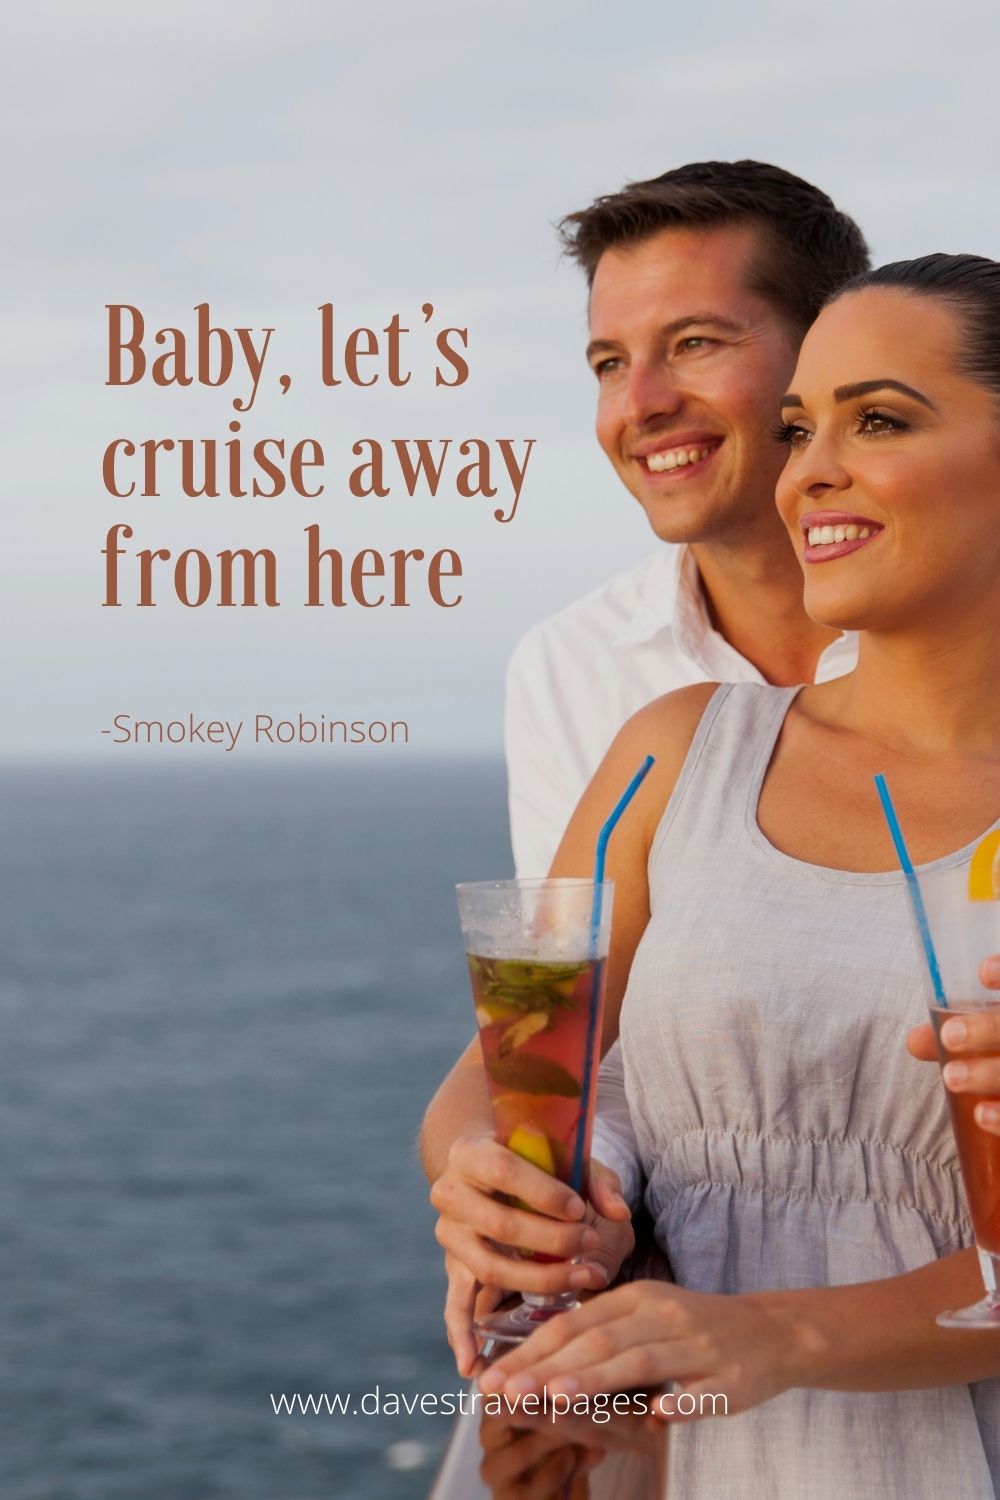 Baby, let’s cruise away from here